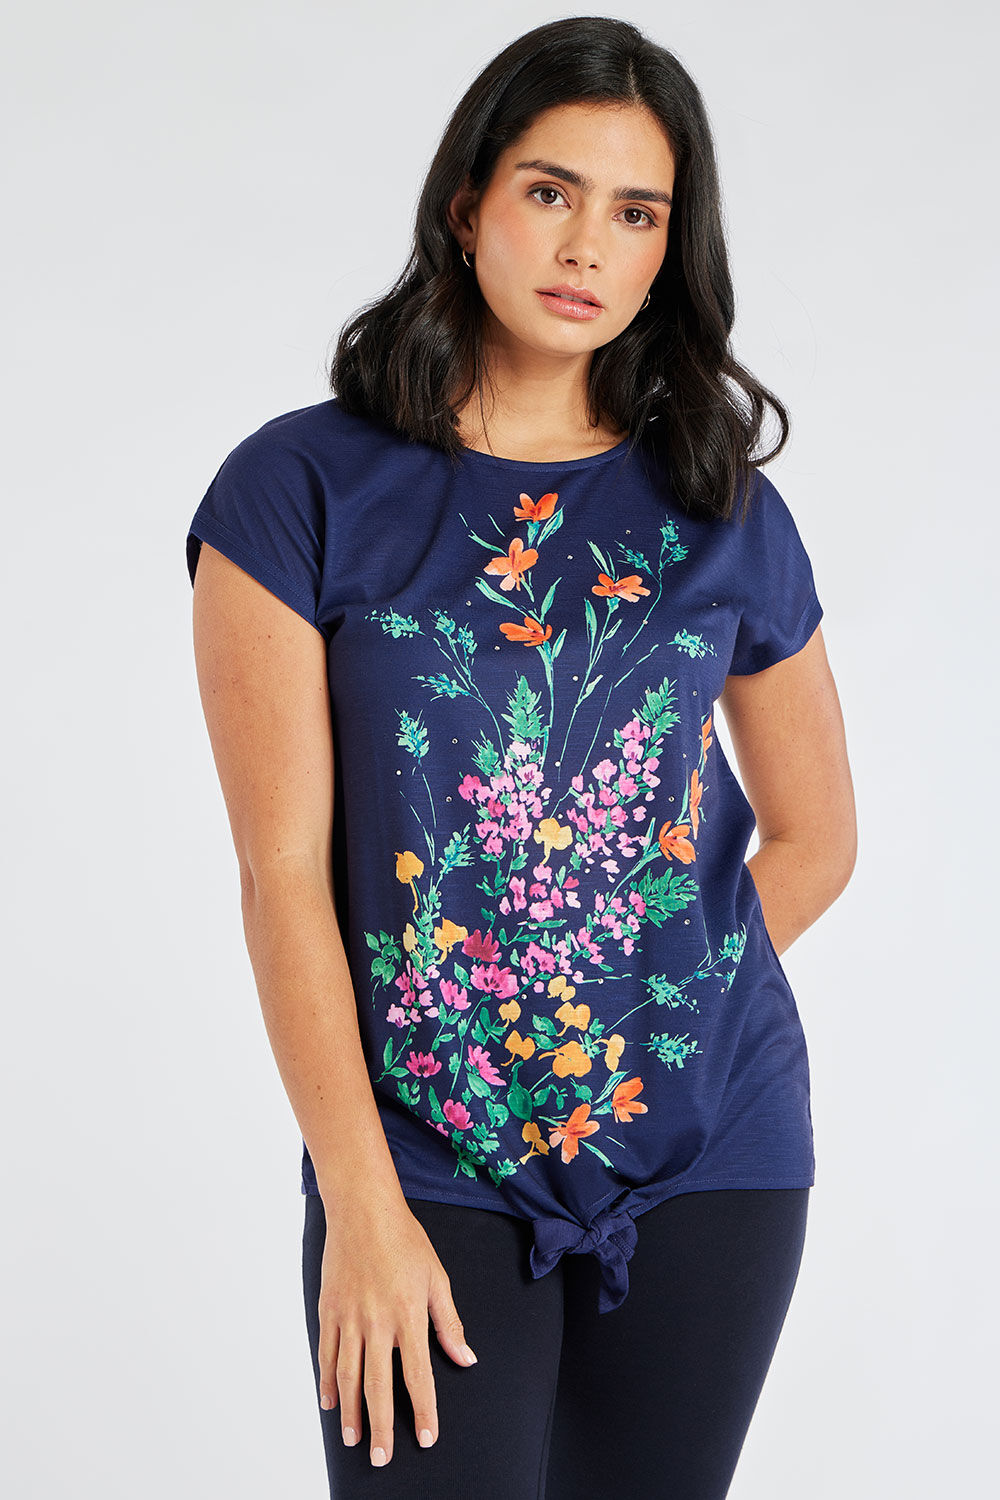 Bonmarche Navy Short Sleeve Sprig Floral Print T-Shirt With Tie Front, Size: 12